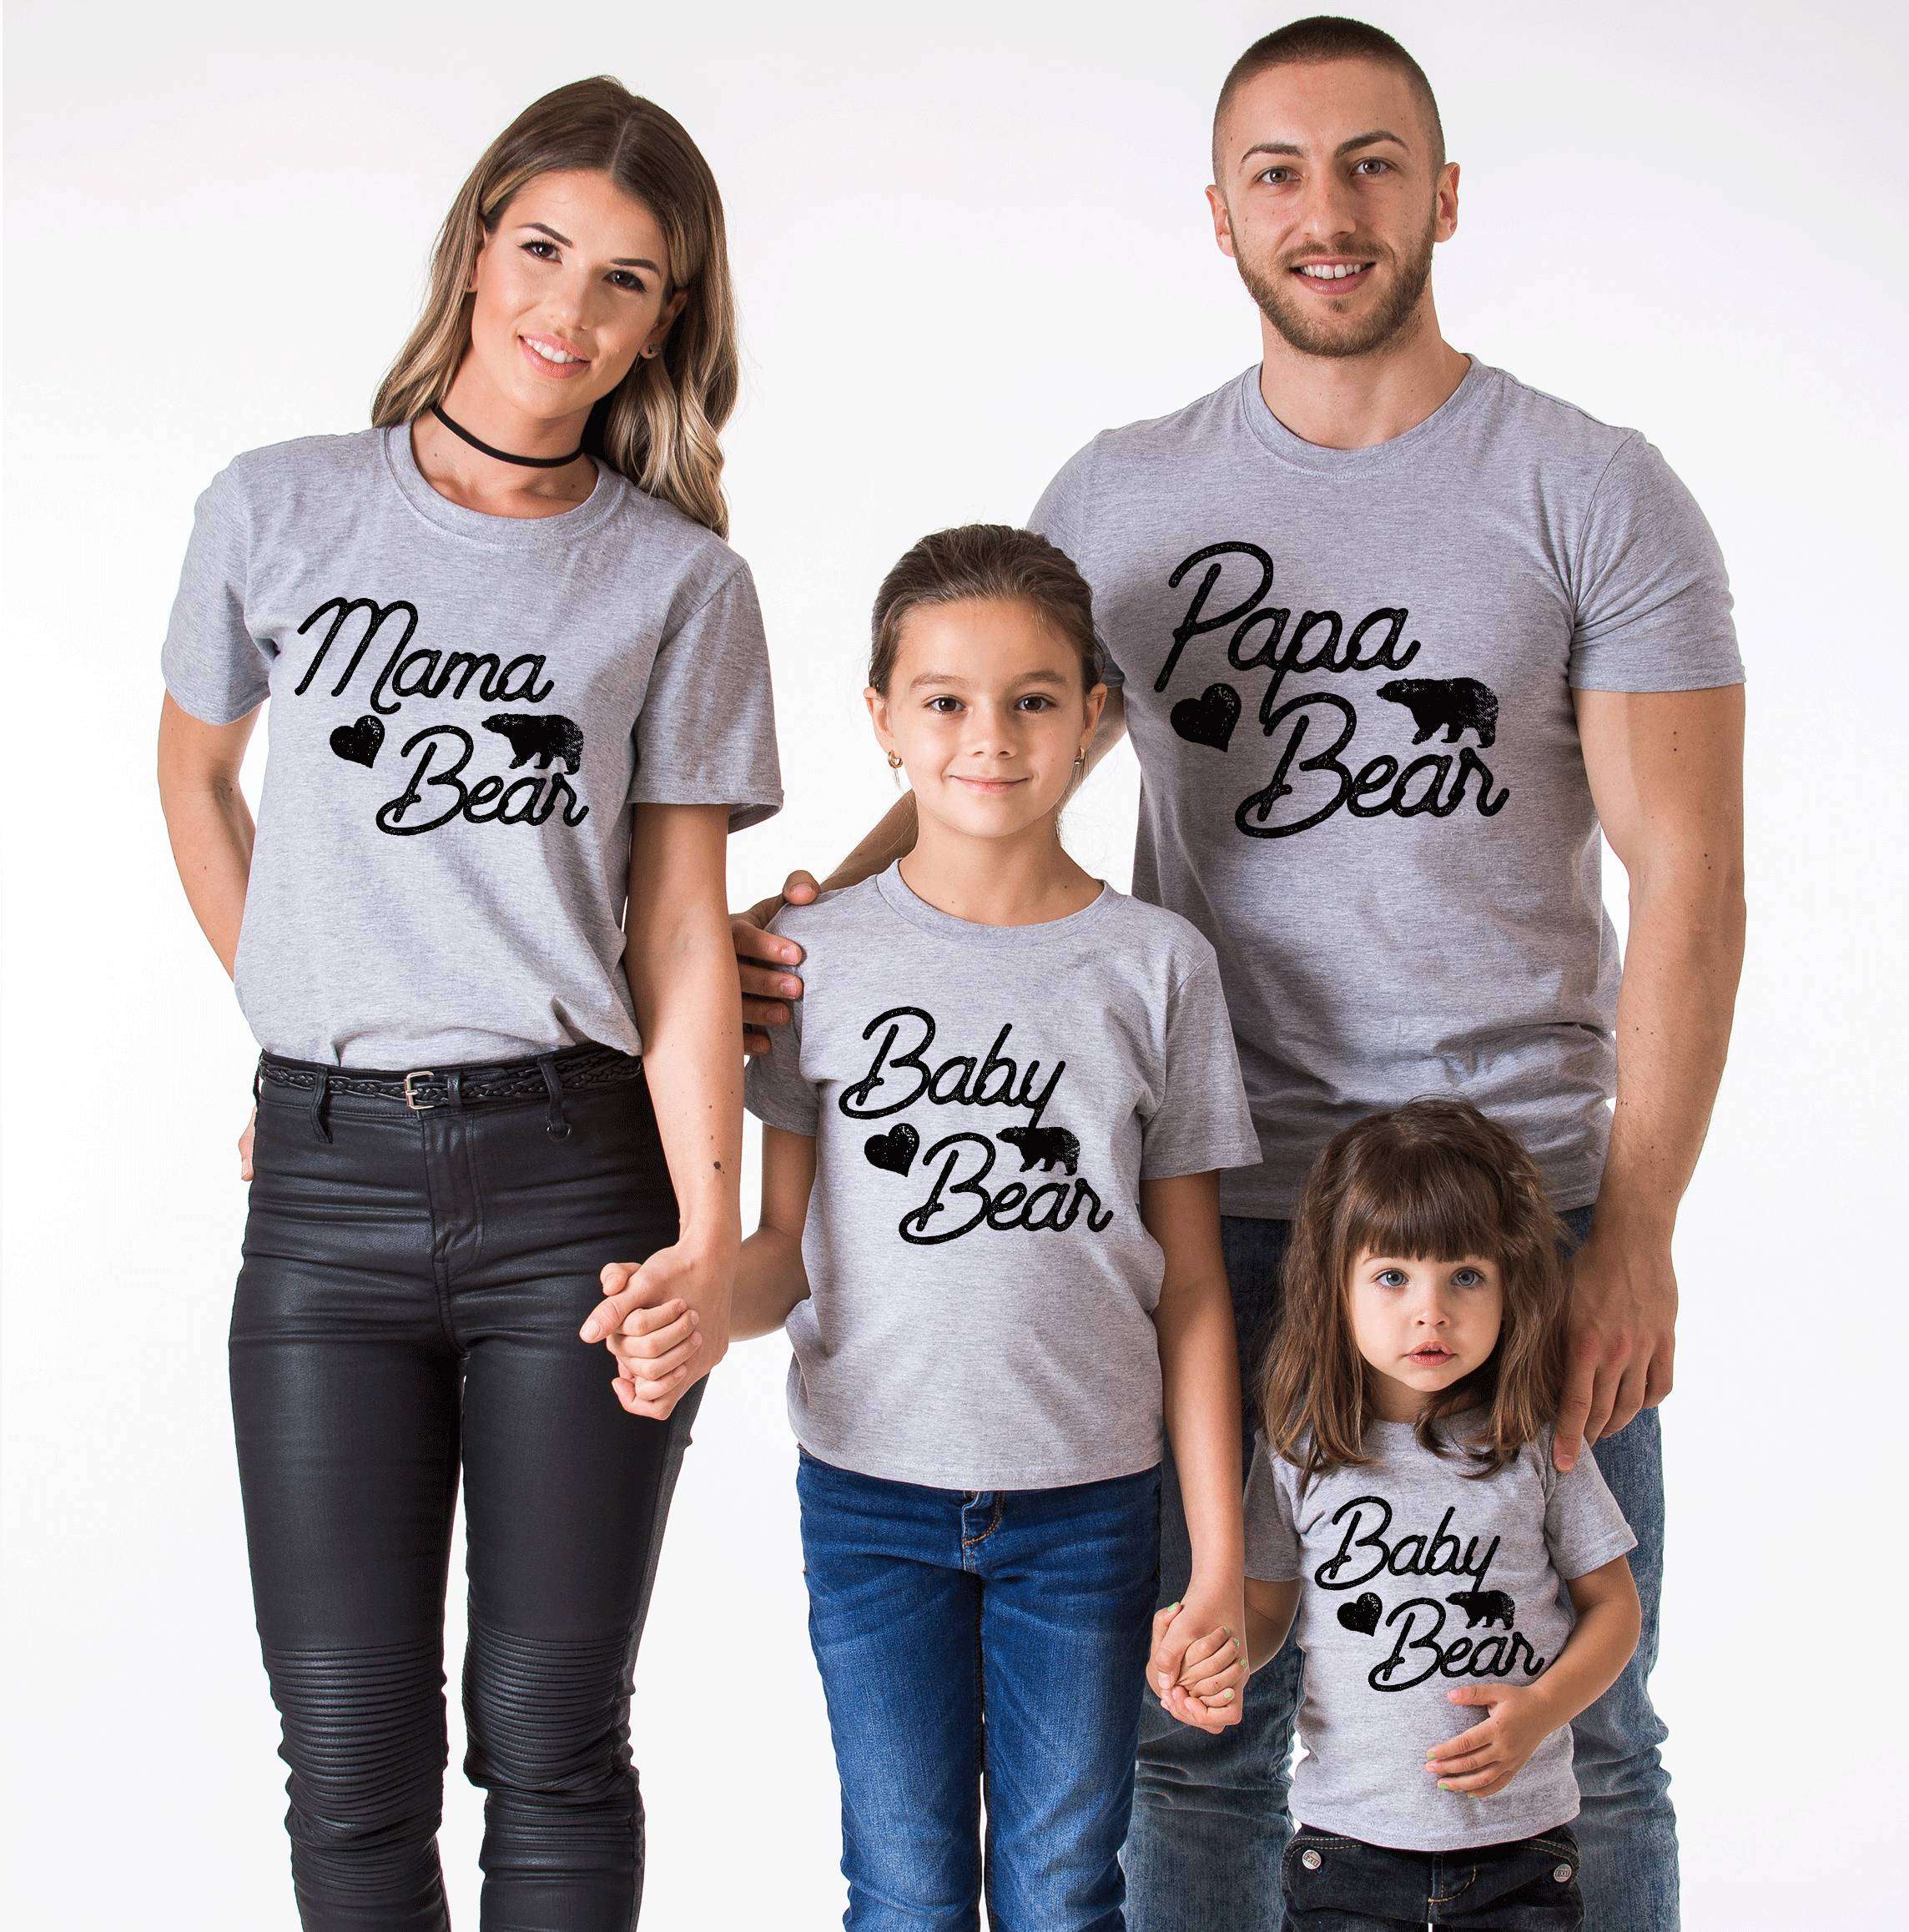 Matching family shirts for pictures Mother and child shirts mama bear papa bear Cute kid tee Unisex Little bear t-shirt for kids